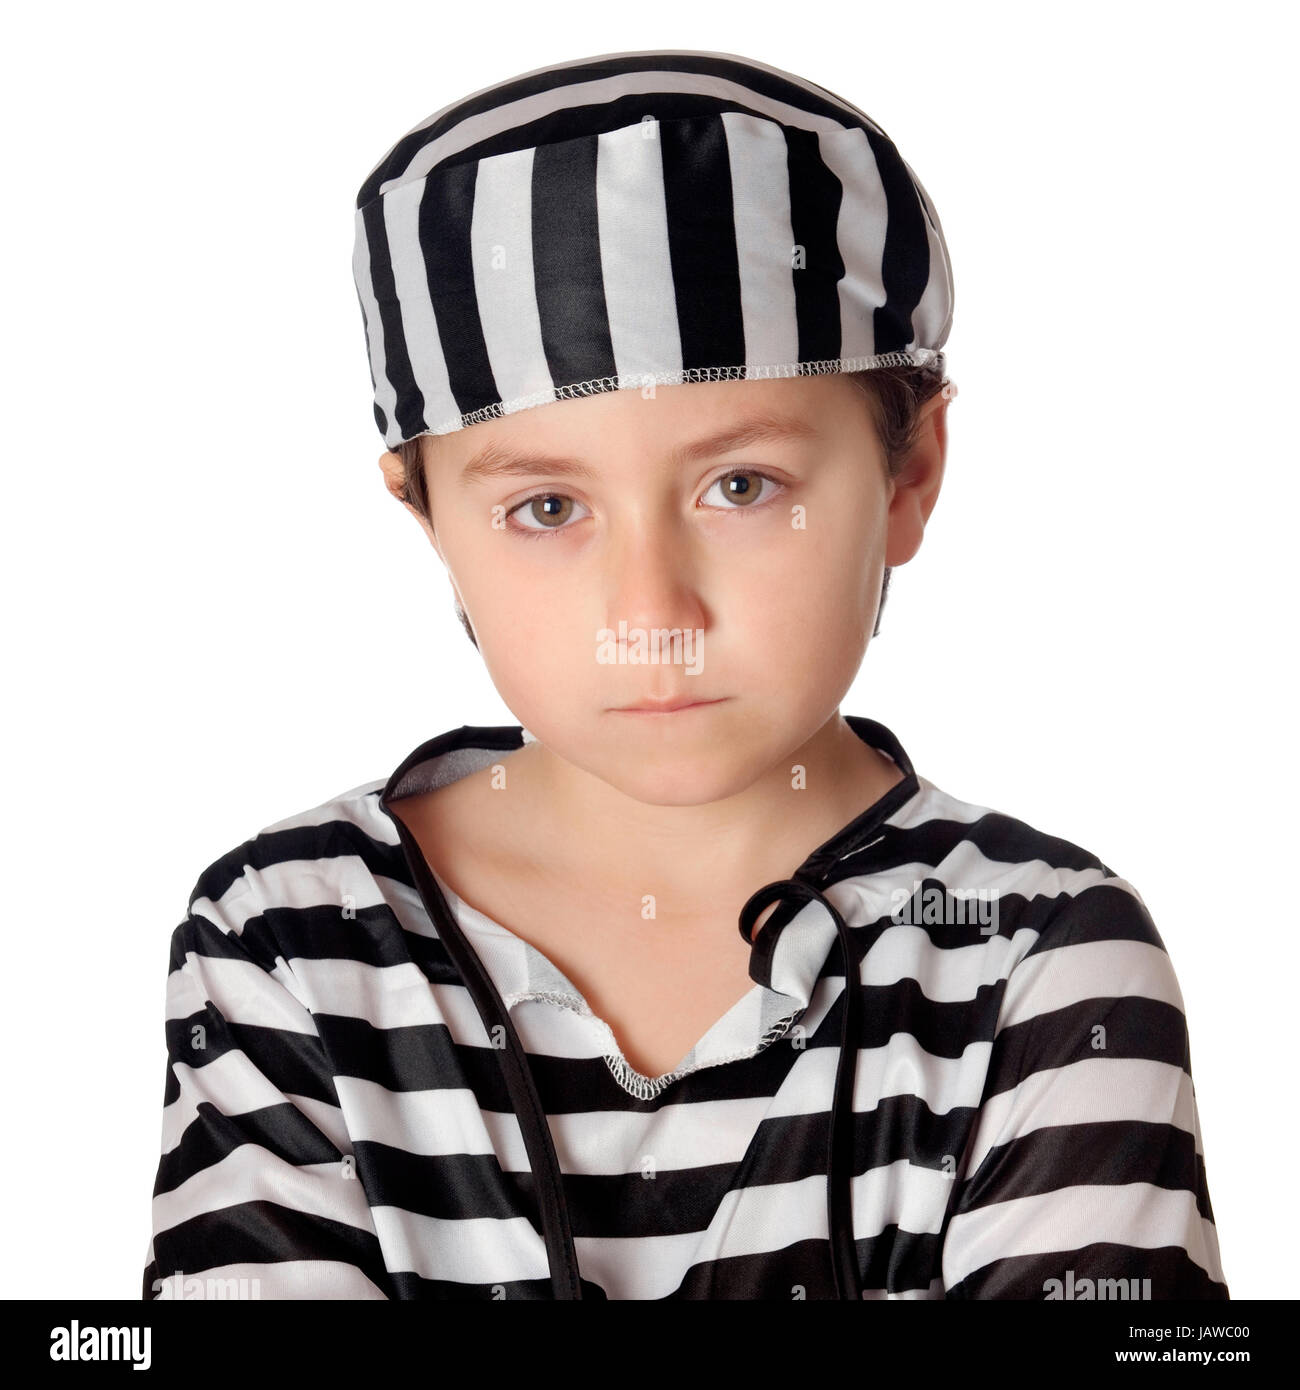 Sad child with with striped prisoner costume isolated on a white background Stock Photo